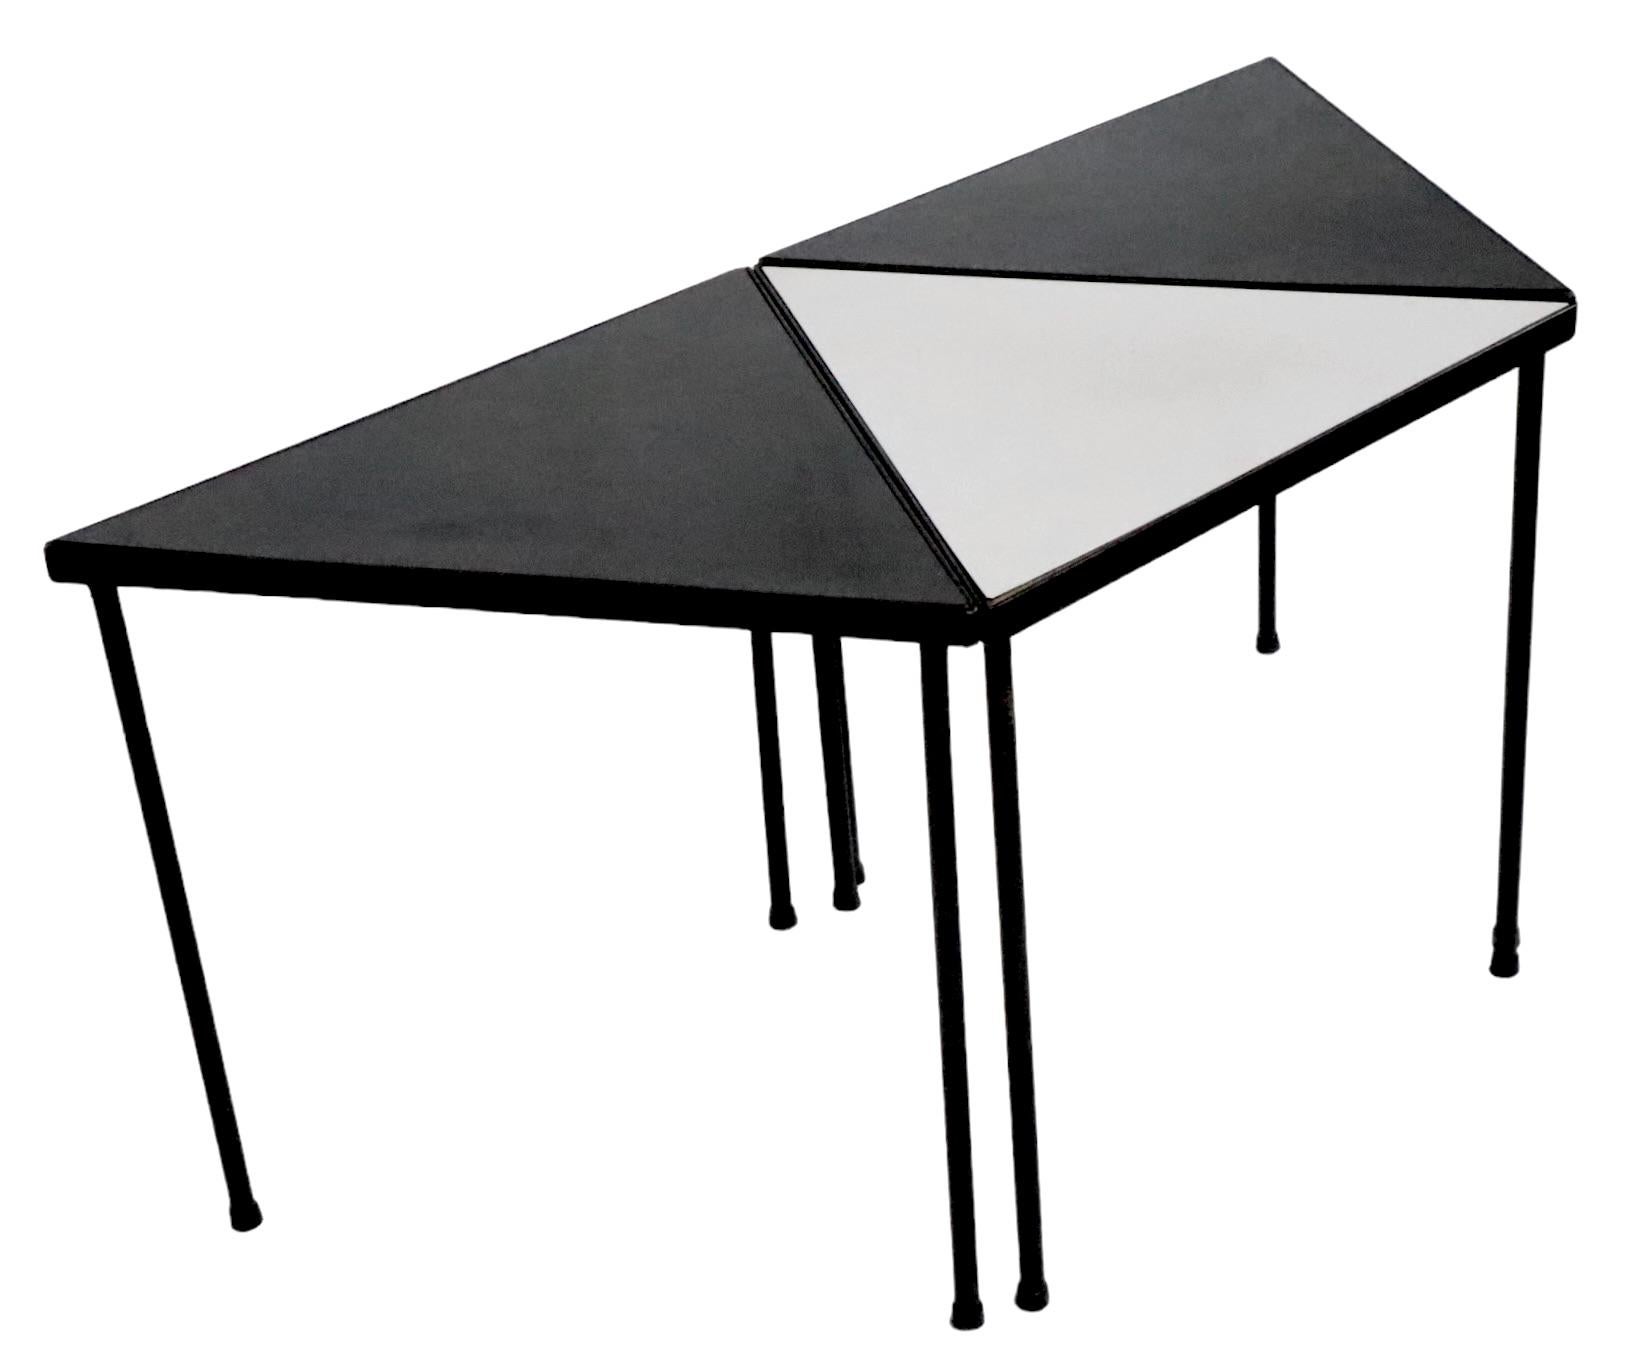  Set of 3 Mid Century Triangular  Stacking Tables by Frederic  Weinberg c 1950's For Sale 9